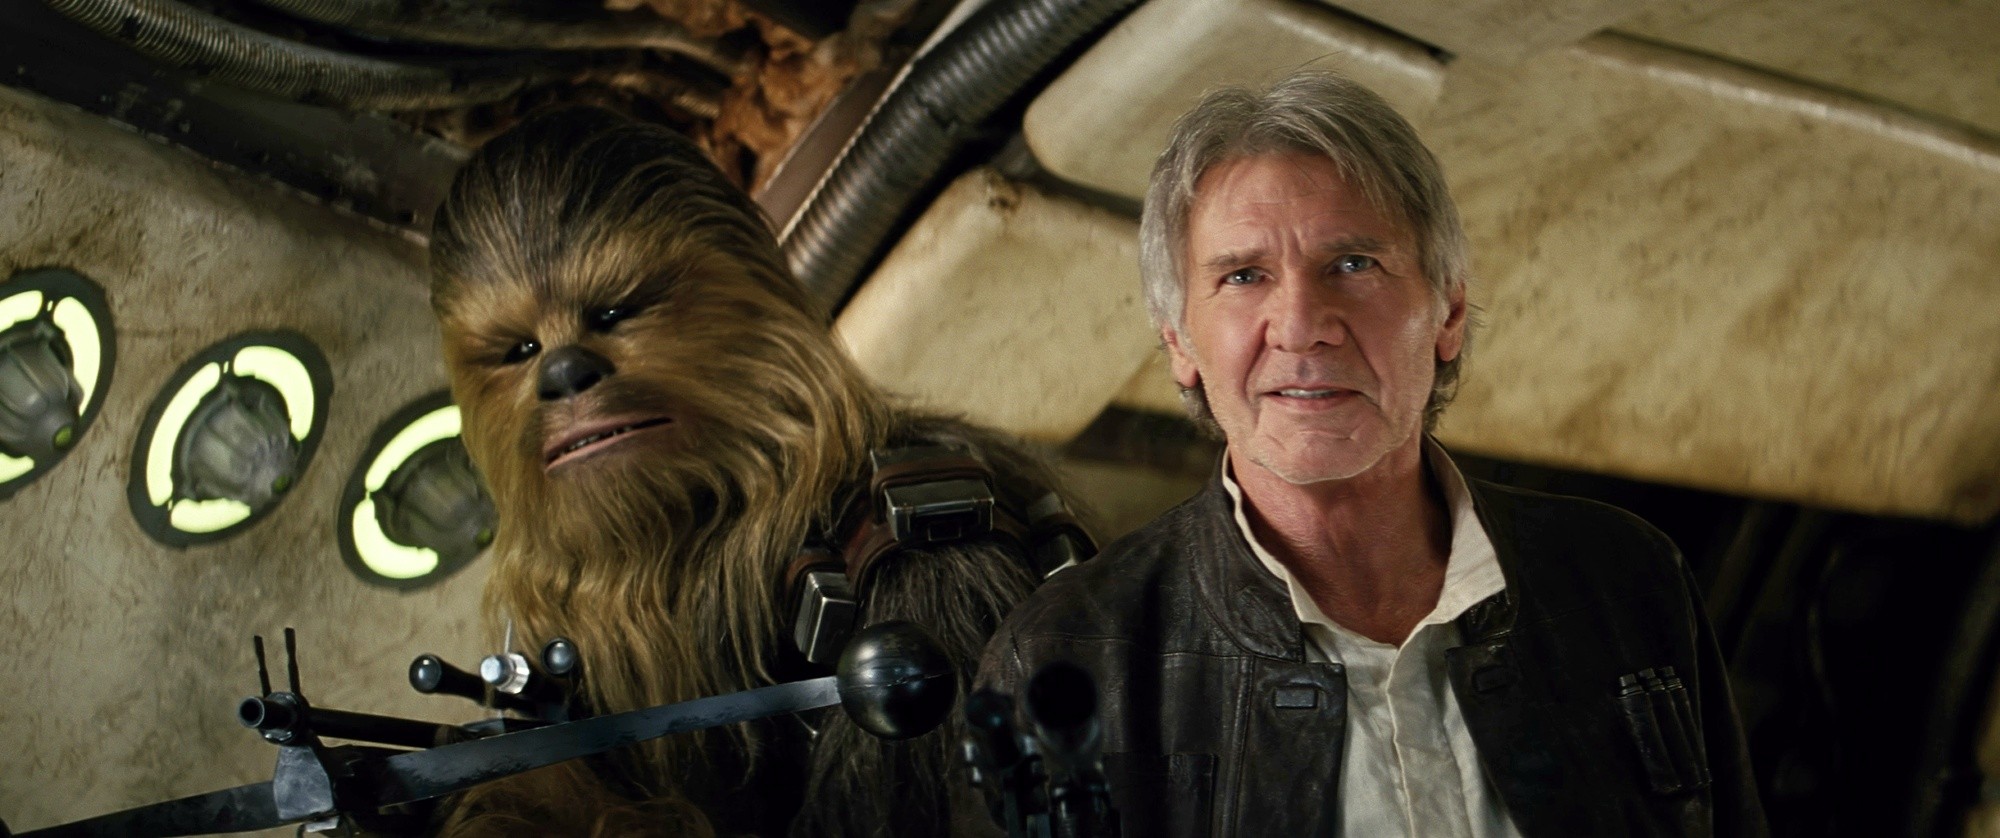 Peter Mayhew stars as Chewbacca and Harrison Ford stars as Han Solo in Walt Disney Pictures' Star Wars: The Force Awakens (2015)